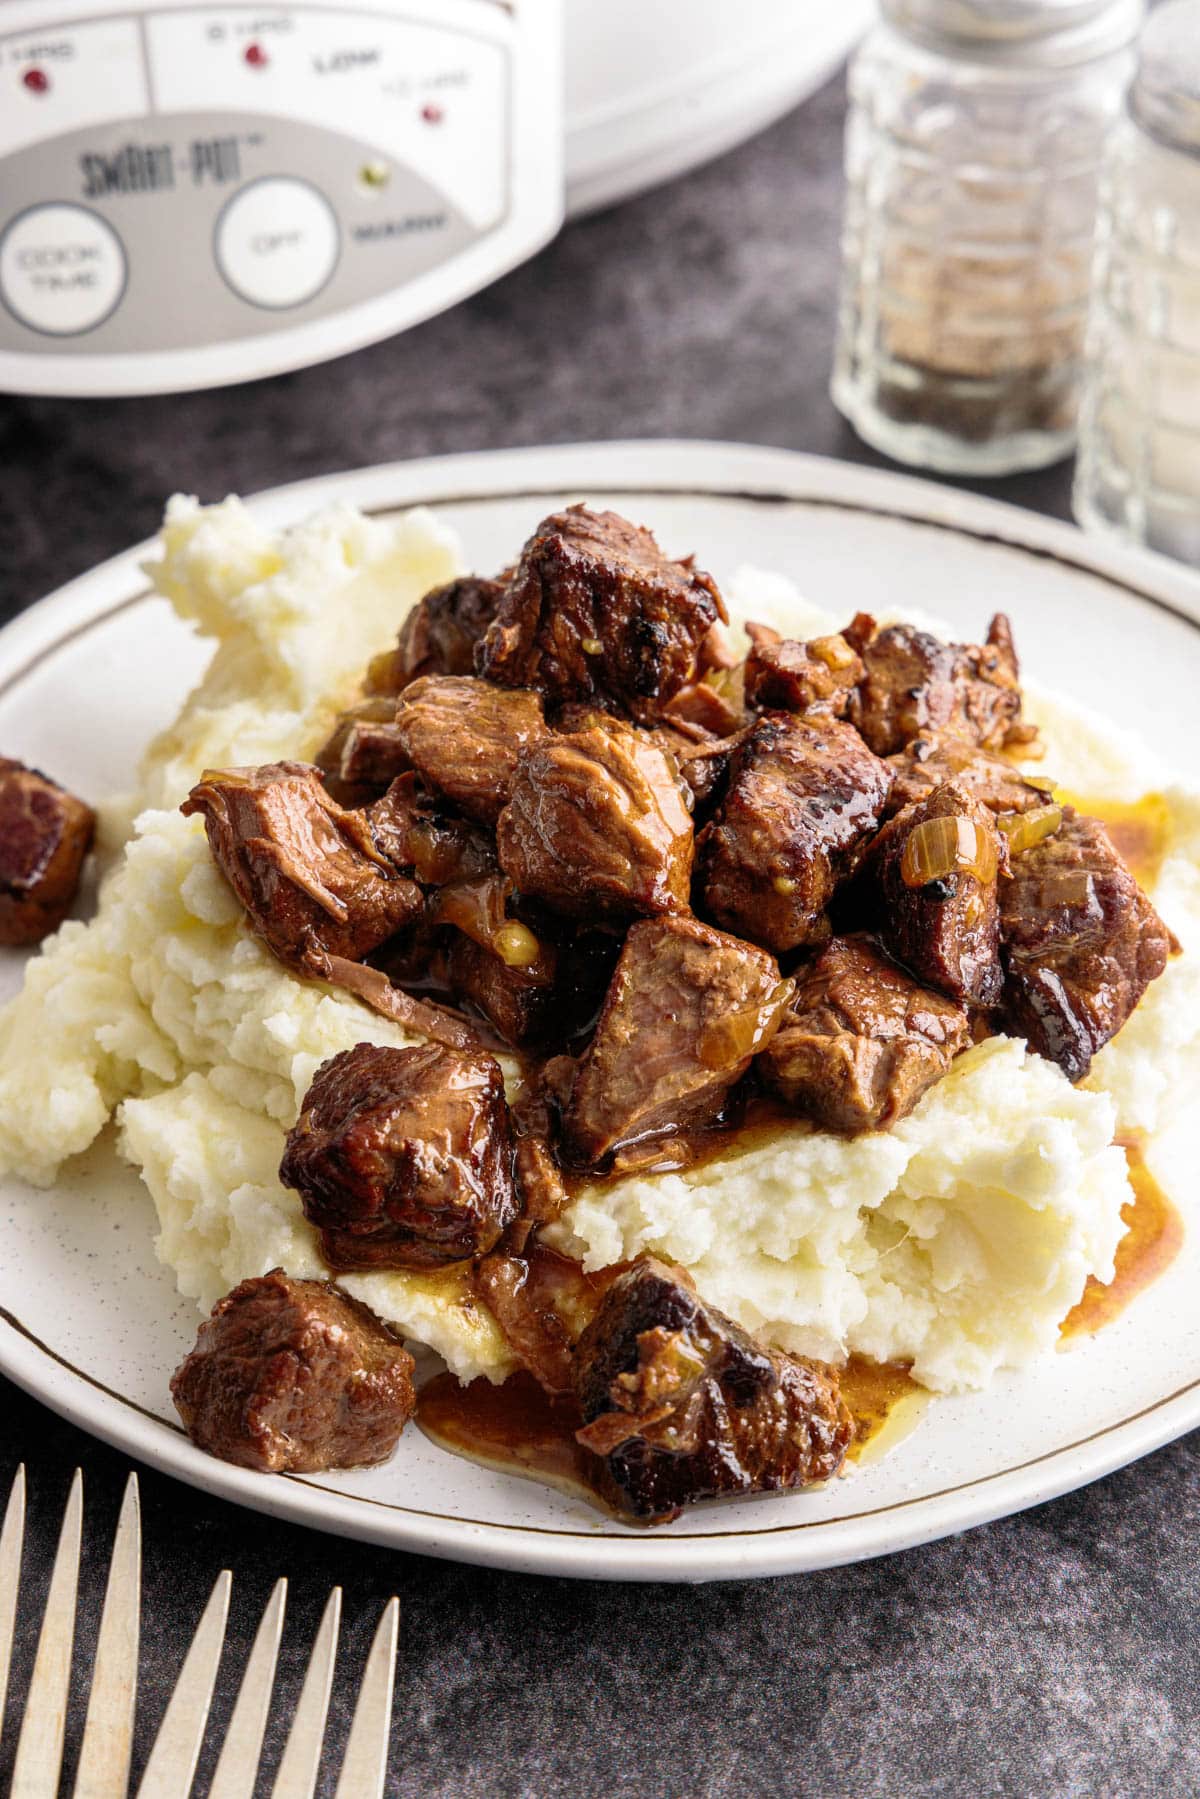 crockpot steak bites on top of mashed potatoes on a plate next to forks and salt and pepper